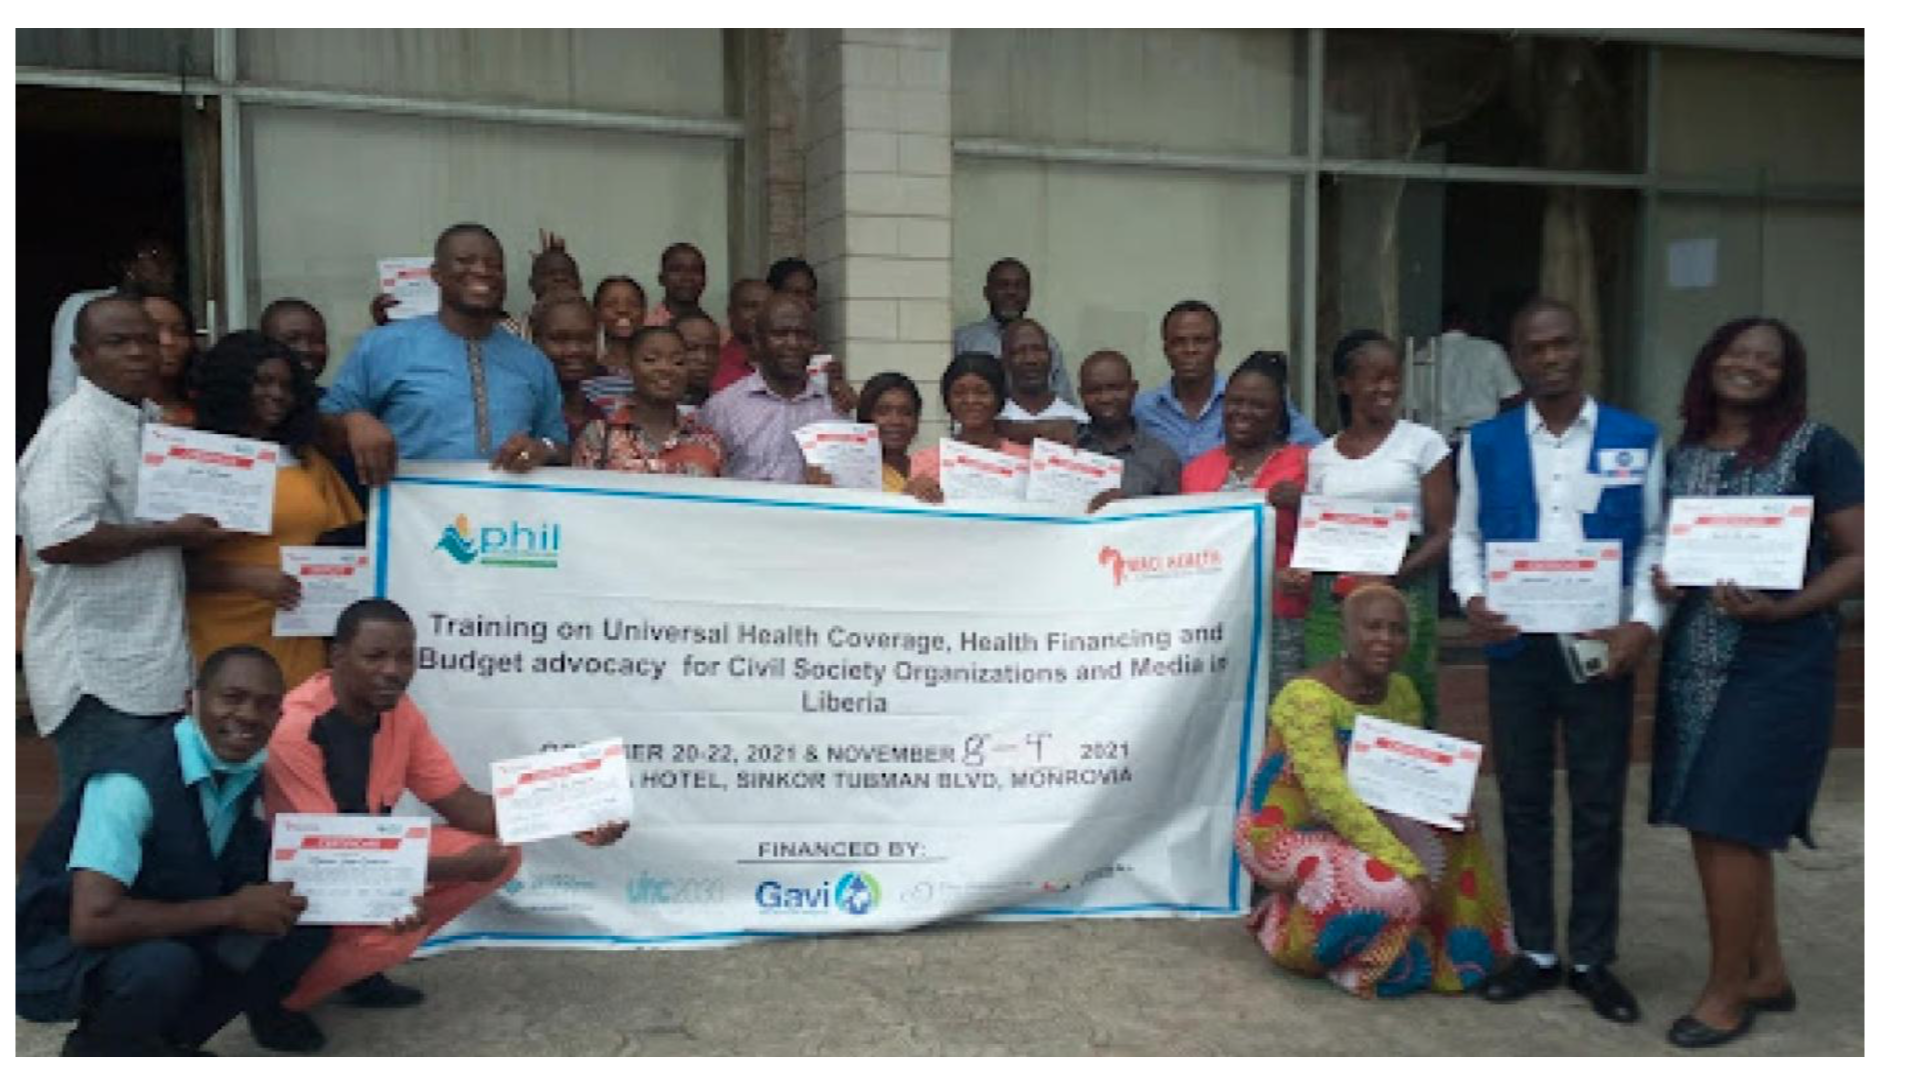 Civil society organisations, media ready to better Liberia’s health coverage and financing by 2030